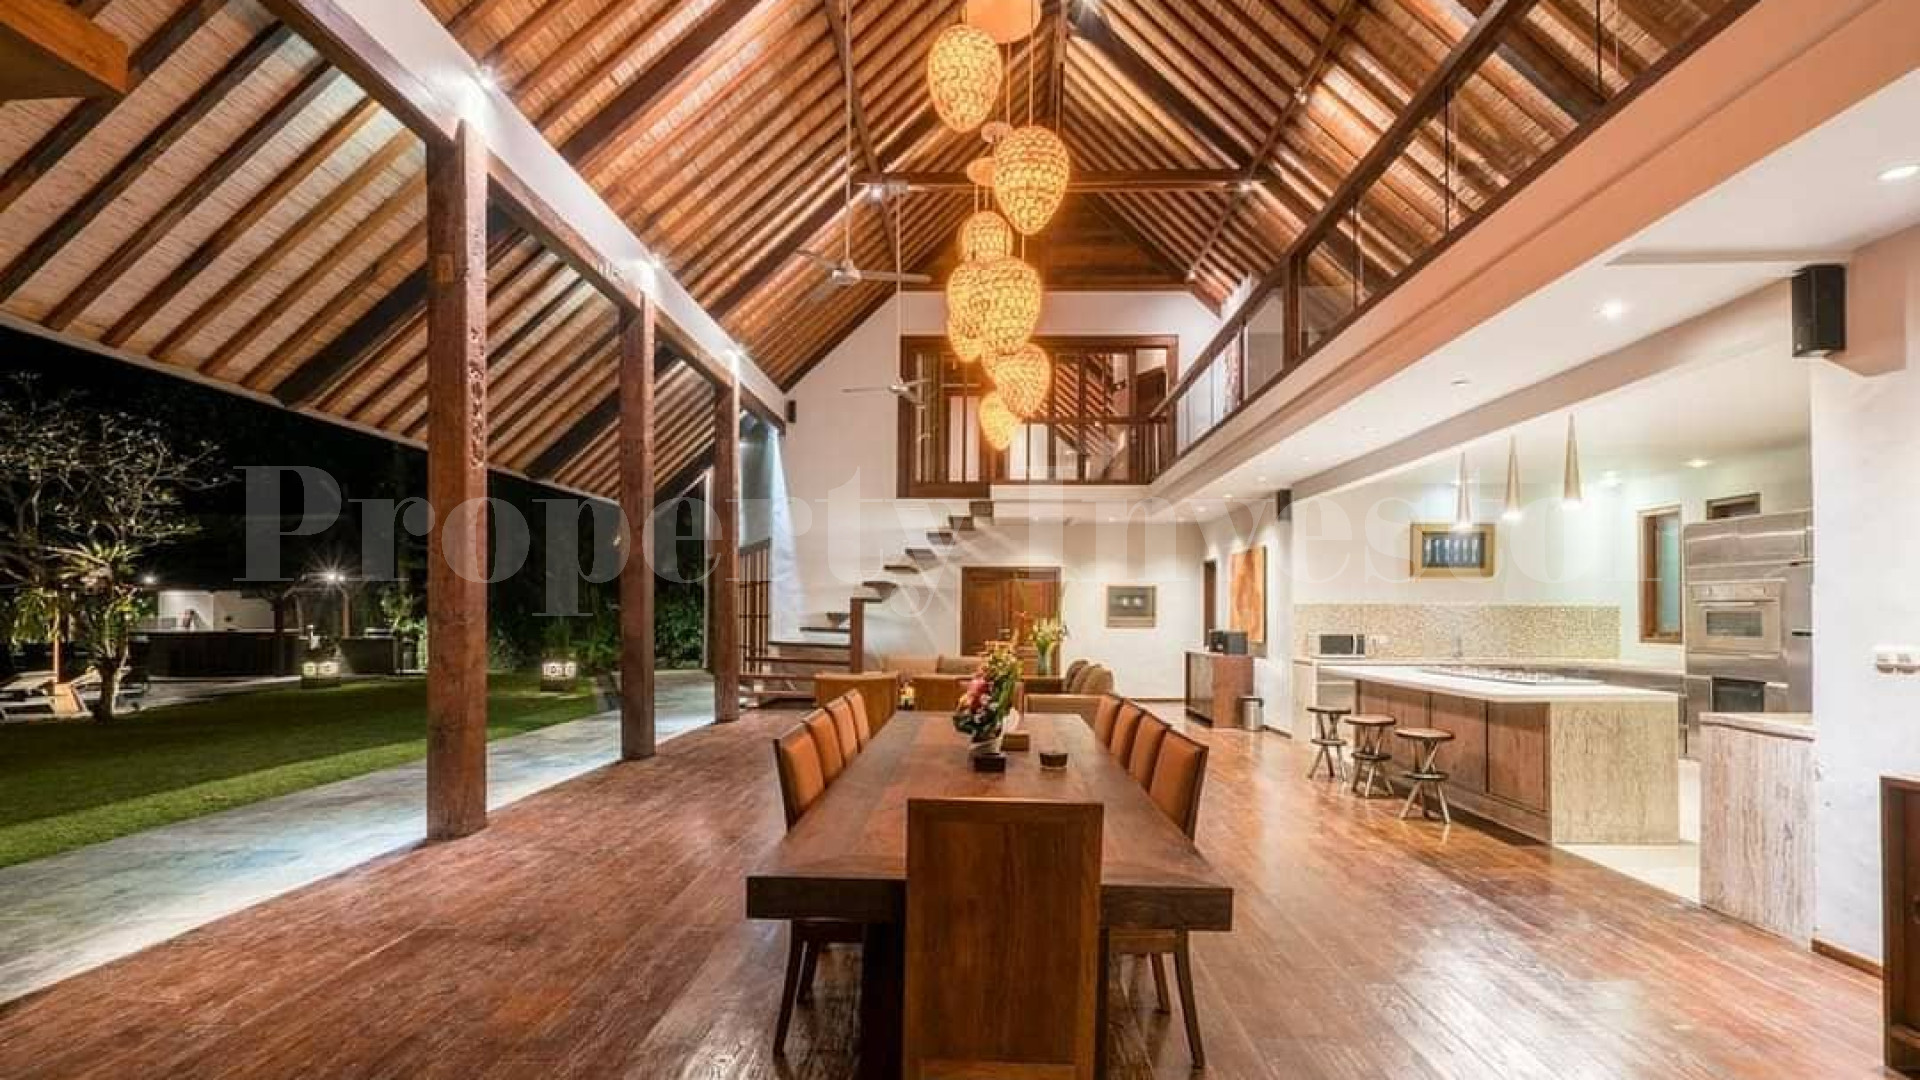 Expansive 7 Bedroom Private Estate with Beautifully Groomed Gardens for Sale in Kerobokan, Bali